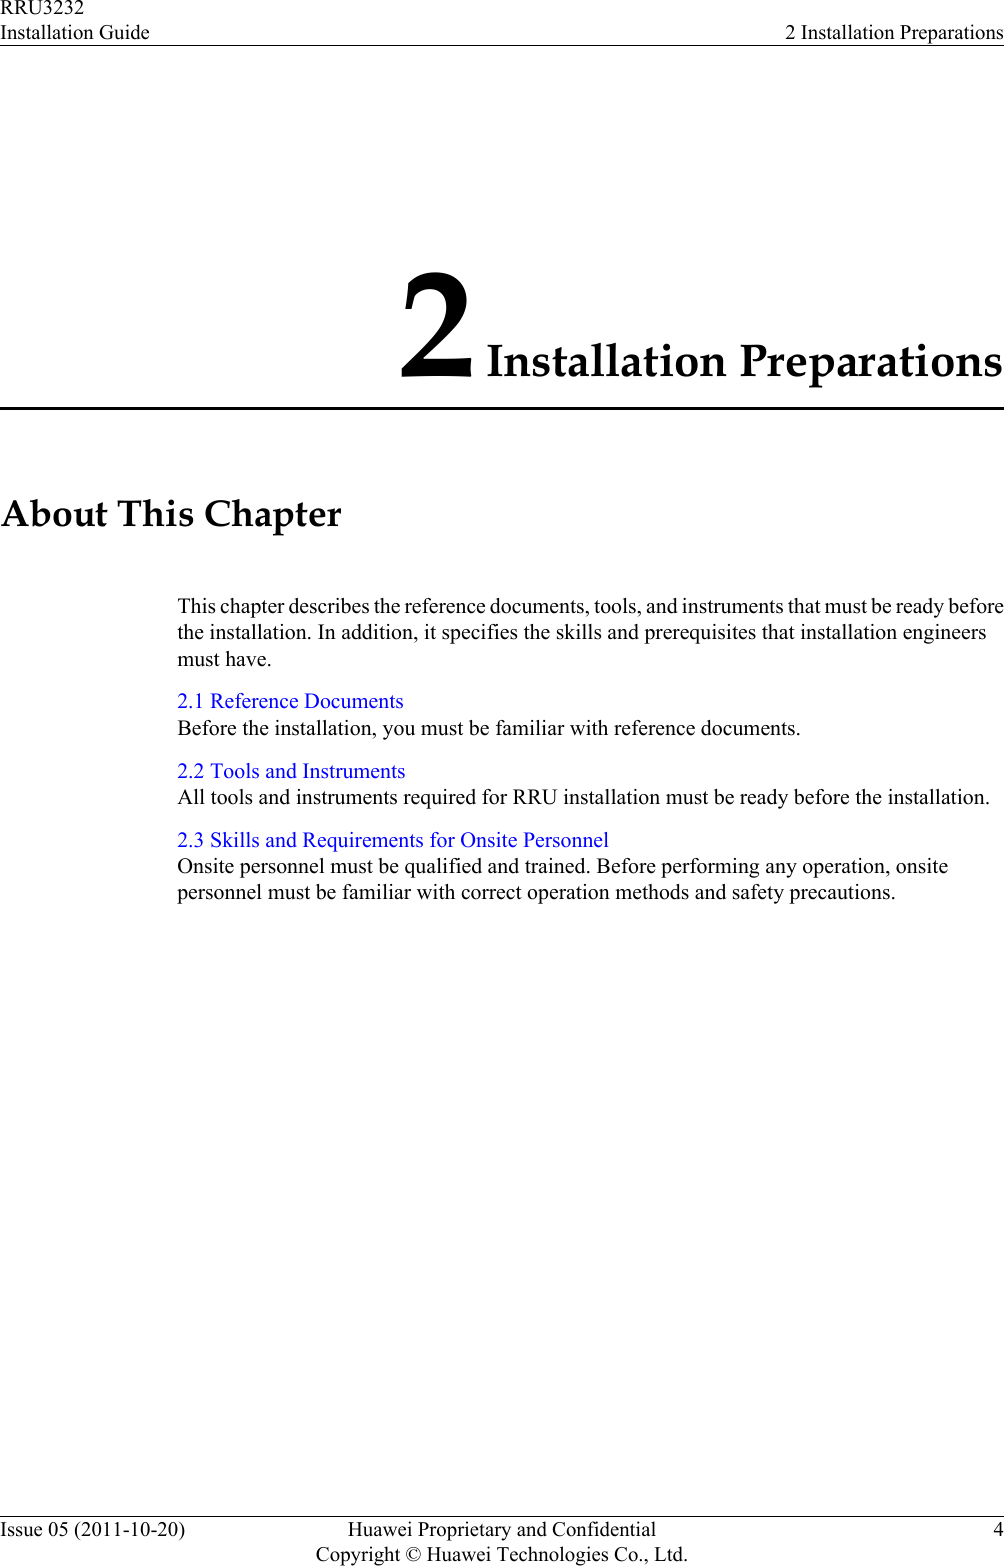 2 Installation PreparationsAbout This ChapterThis chapter describes the reference documents, tools, and instruments that must be ready beforethe installation. In addition, it specifies the skills and prerequisites that installation engineersmust have.2.1 Reference DocumentsBefore the installation, you must be familiar with reference documents.2.2 Tools and InstrumentsAll tools and instruments required for RRU installation must be ready before the installation.2.3 Skills and Requirements for Onsite PersonnelOnsite personnel must be qualified and trained. Before performing any operation, onsitepersonnel must be familiar with correct operation methods and safety precautions.RRU3232Installation Guide 2 Installation PreparationsIssue 05 (2011-10-20) Huawei Proprietary and ConfidentialCopyright © Huawei Technologies Co., Ltd.4